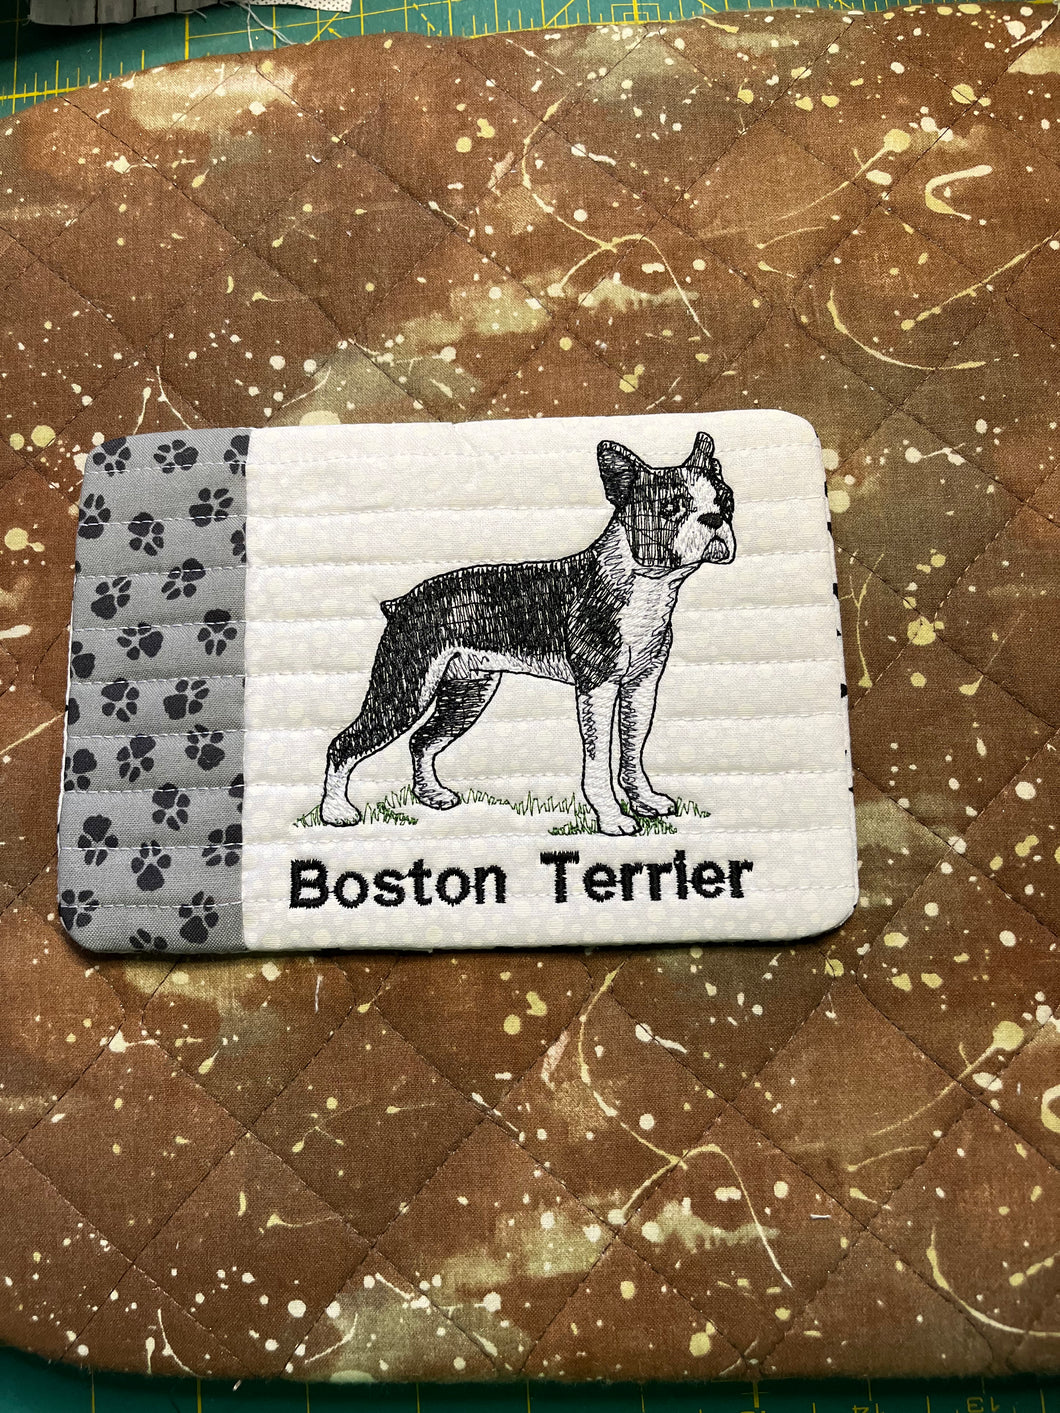 Is the Boston Terrier your favorite Dog?  You're gonna love this!